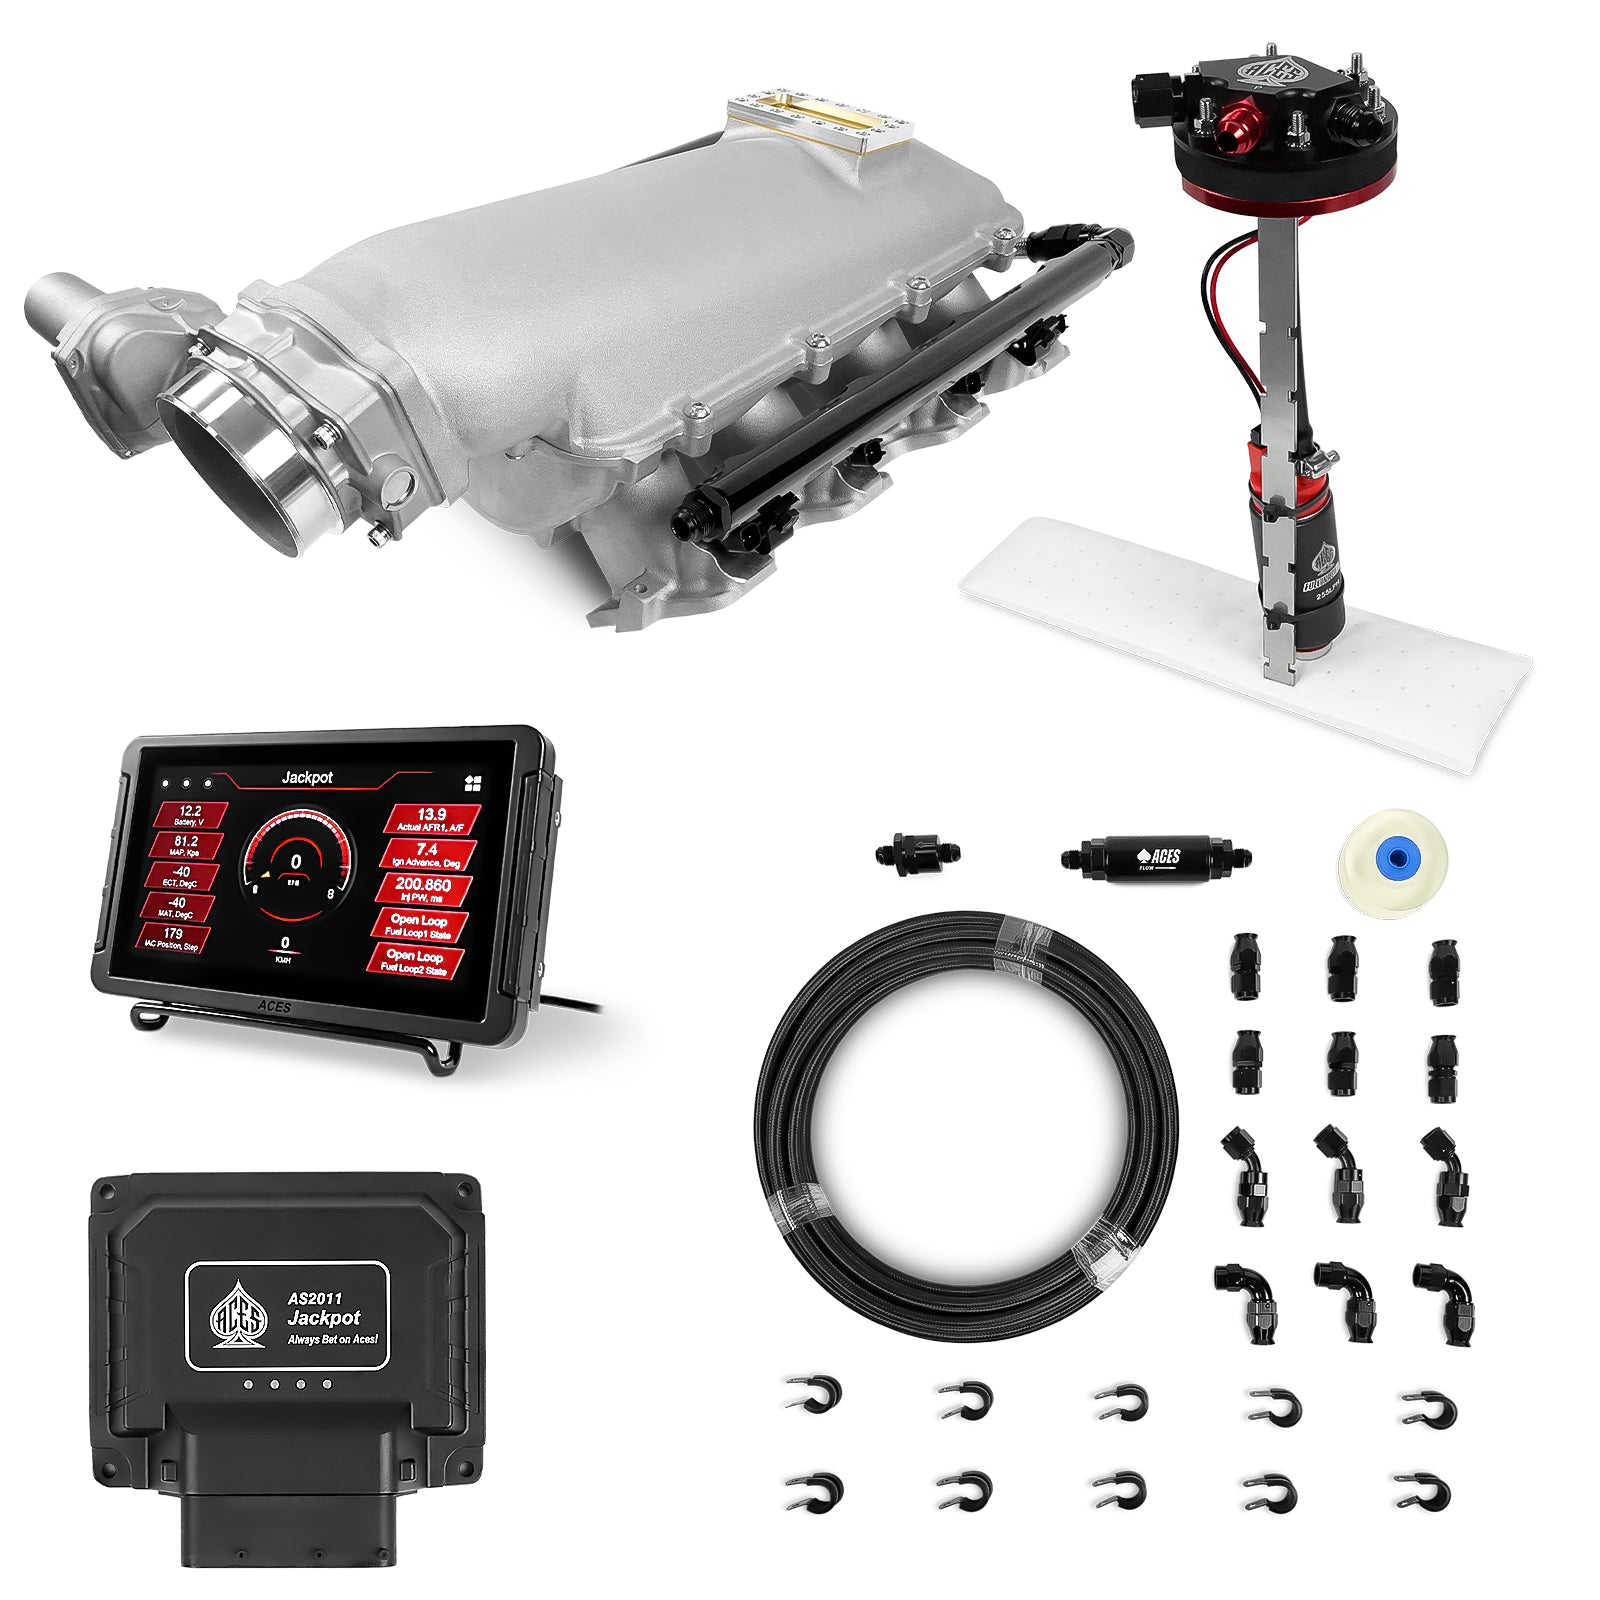 Jackpot LS EFI System - Master Kit with Tight Fit In-Tank Pump Module + 40' PTFE Hose Kit